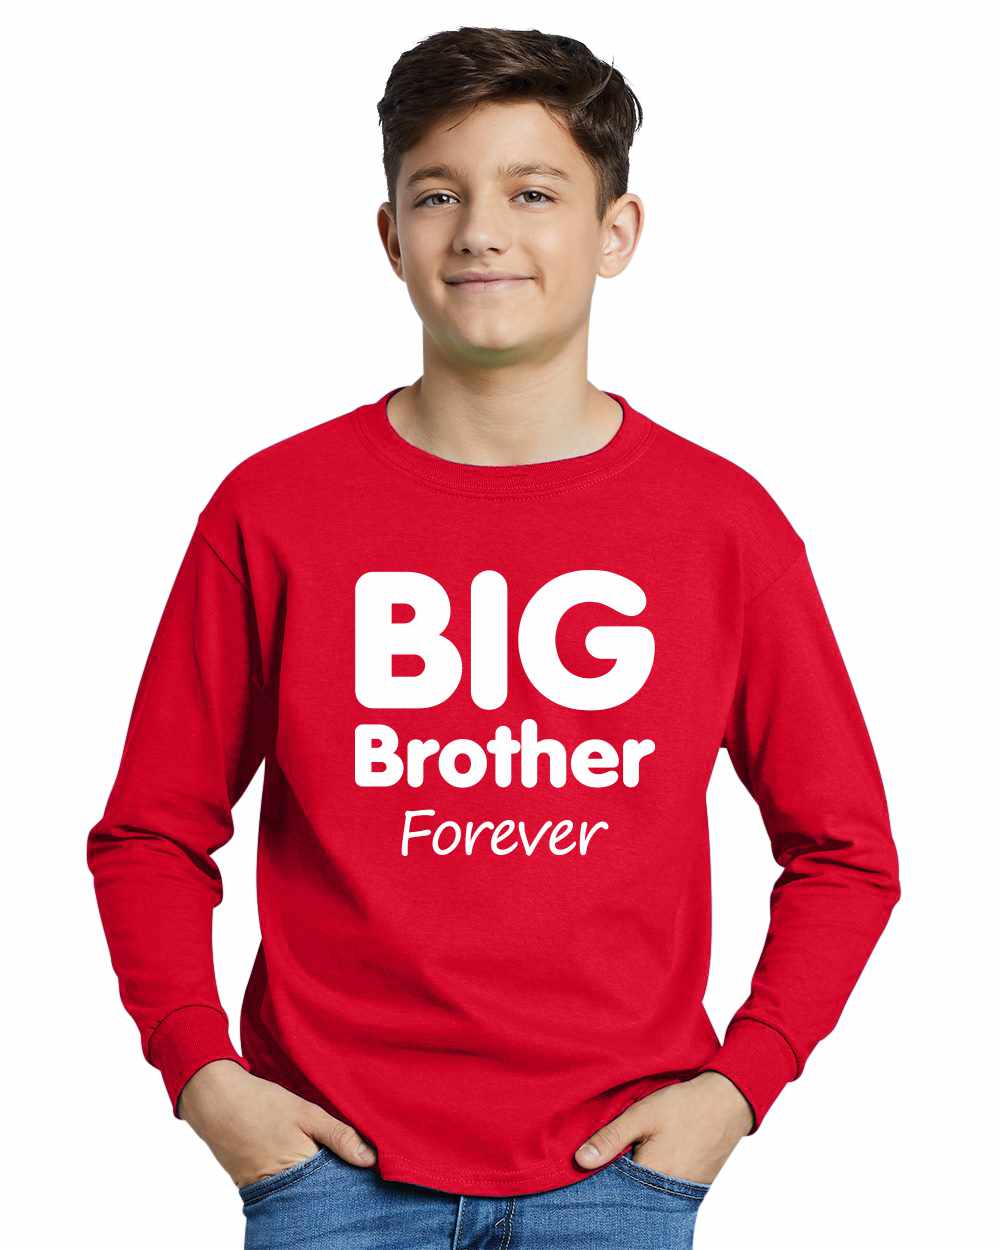 Big Brother Forever on Youth Long Sleeve Shirt